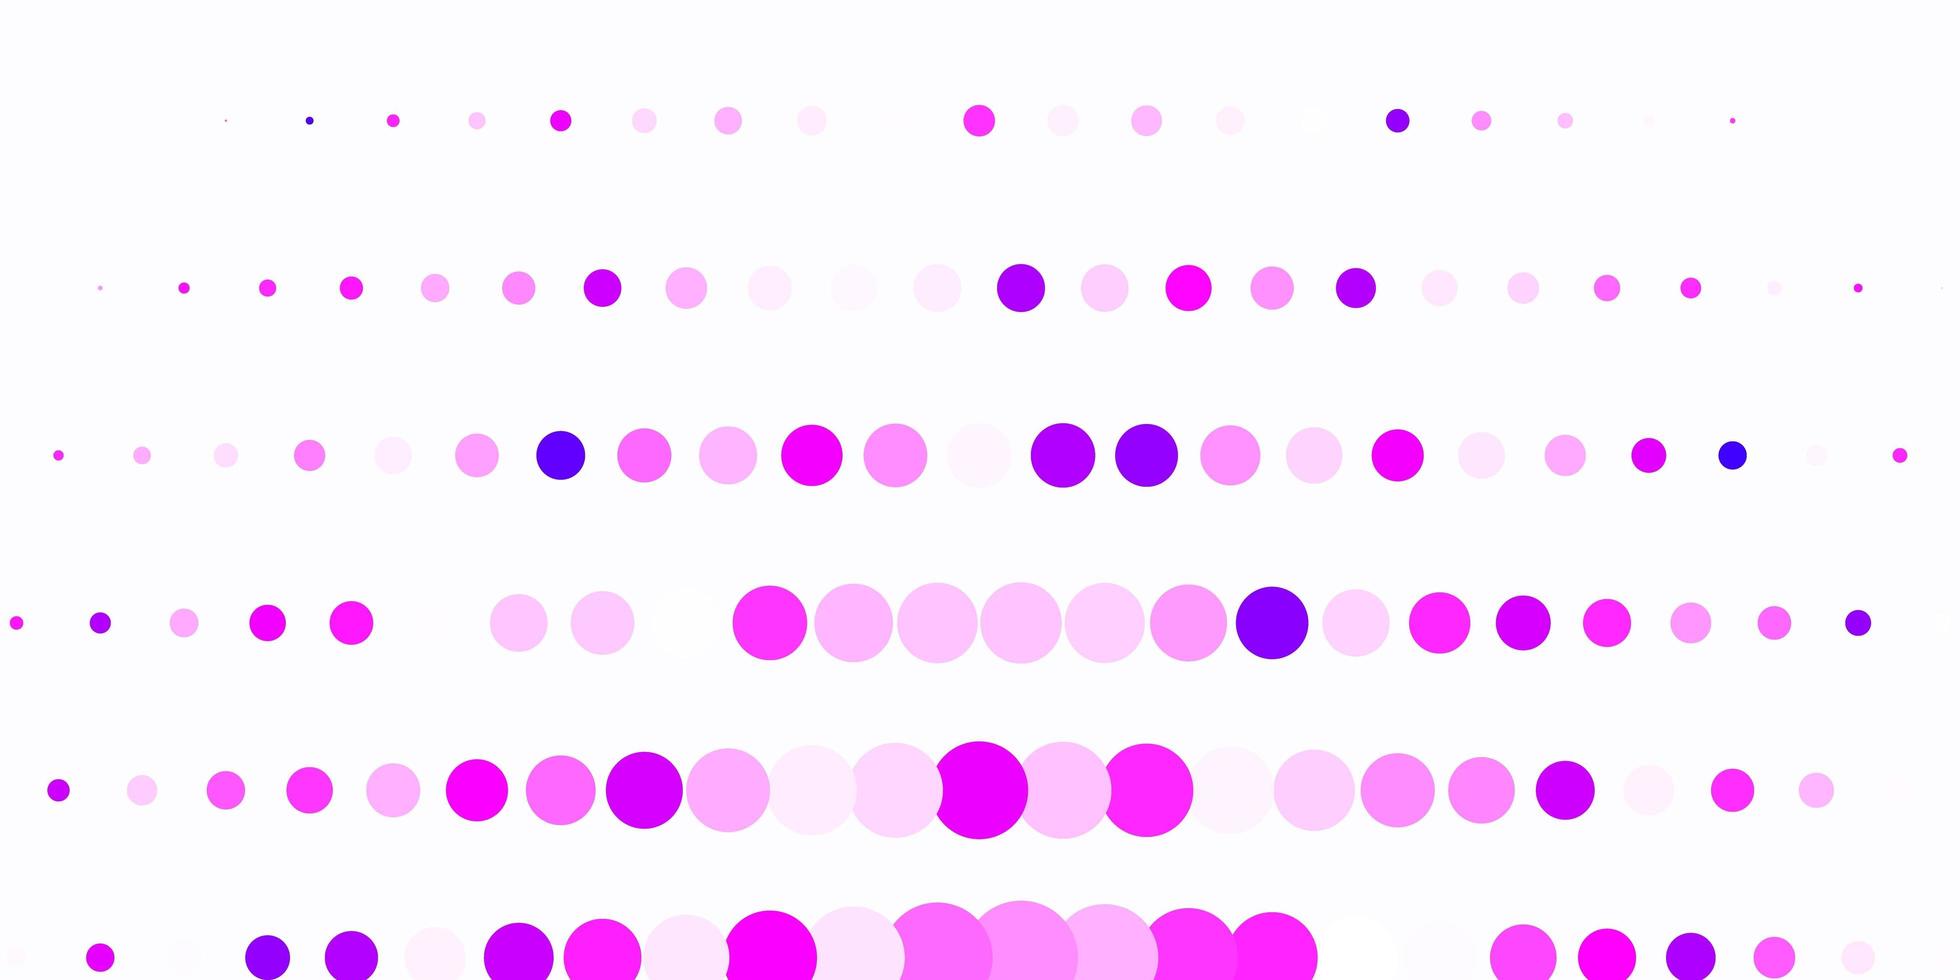 Light Pink vector layout with circles.